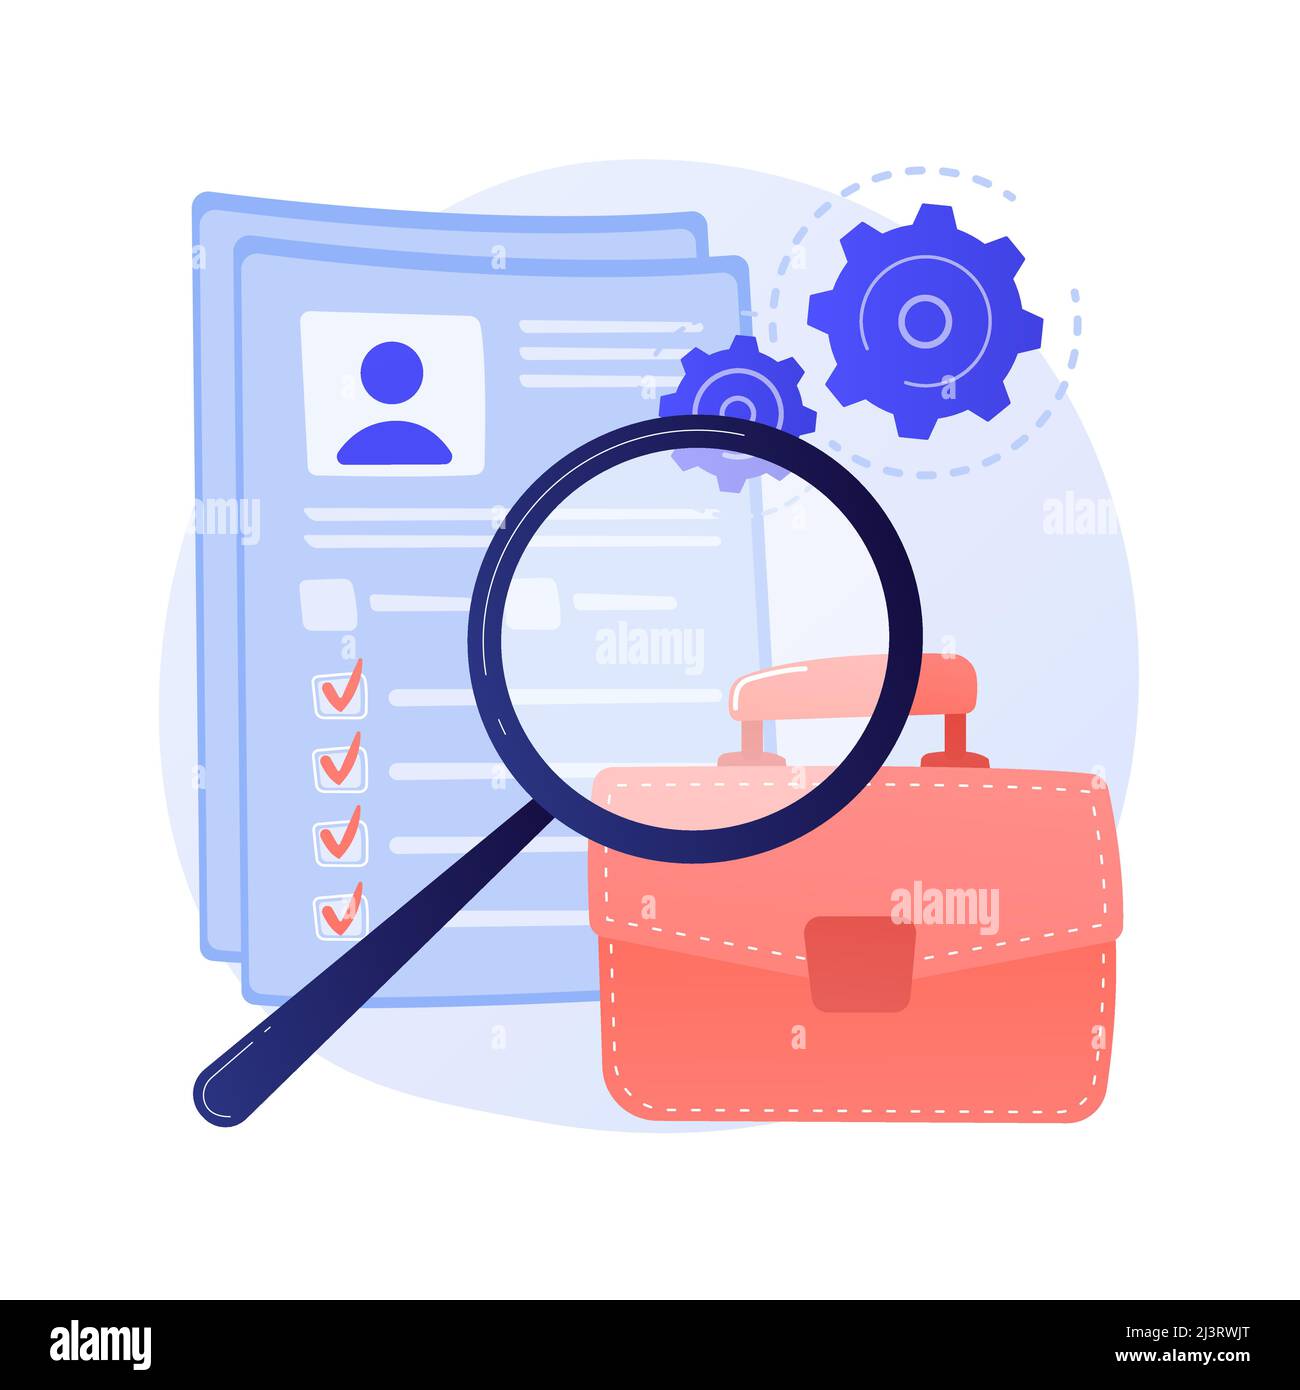 Instruction manual, guide. Document with cogwheel isolated design element. Male character analyzing file. Business analysis, data processing, updating Stock Vector